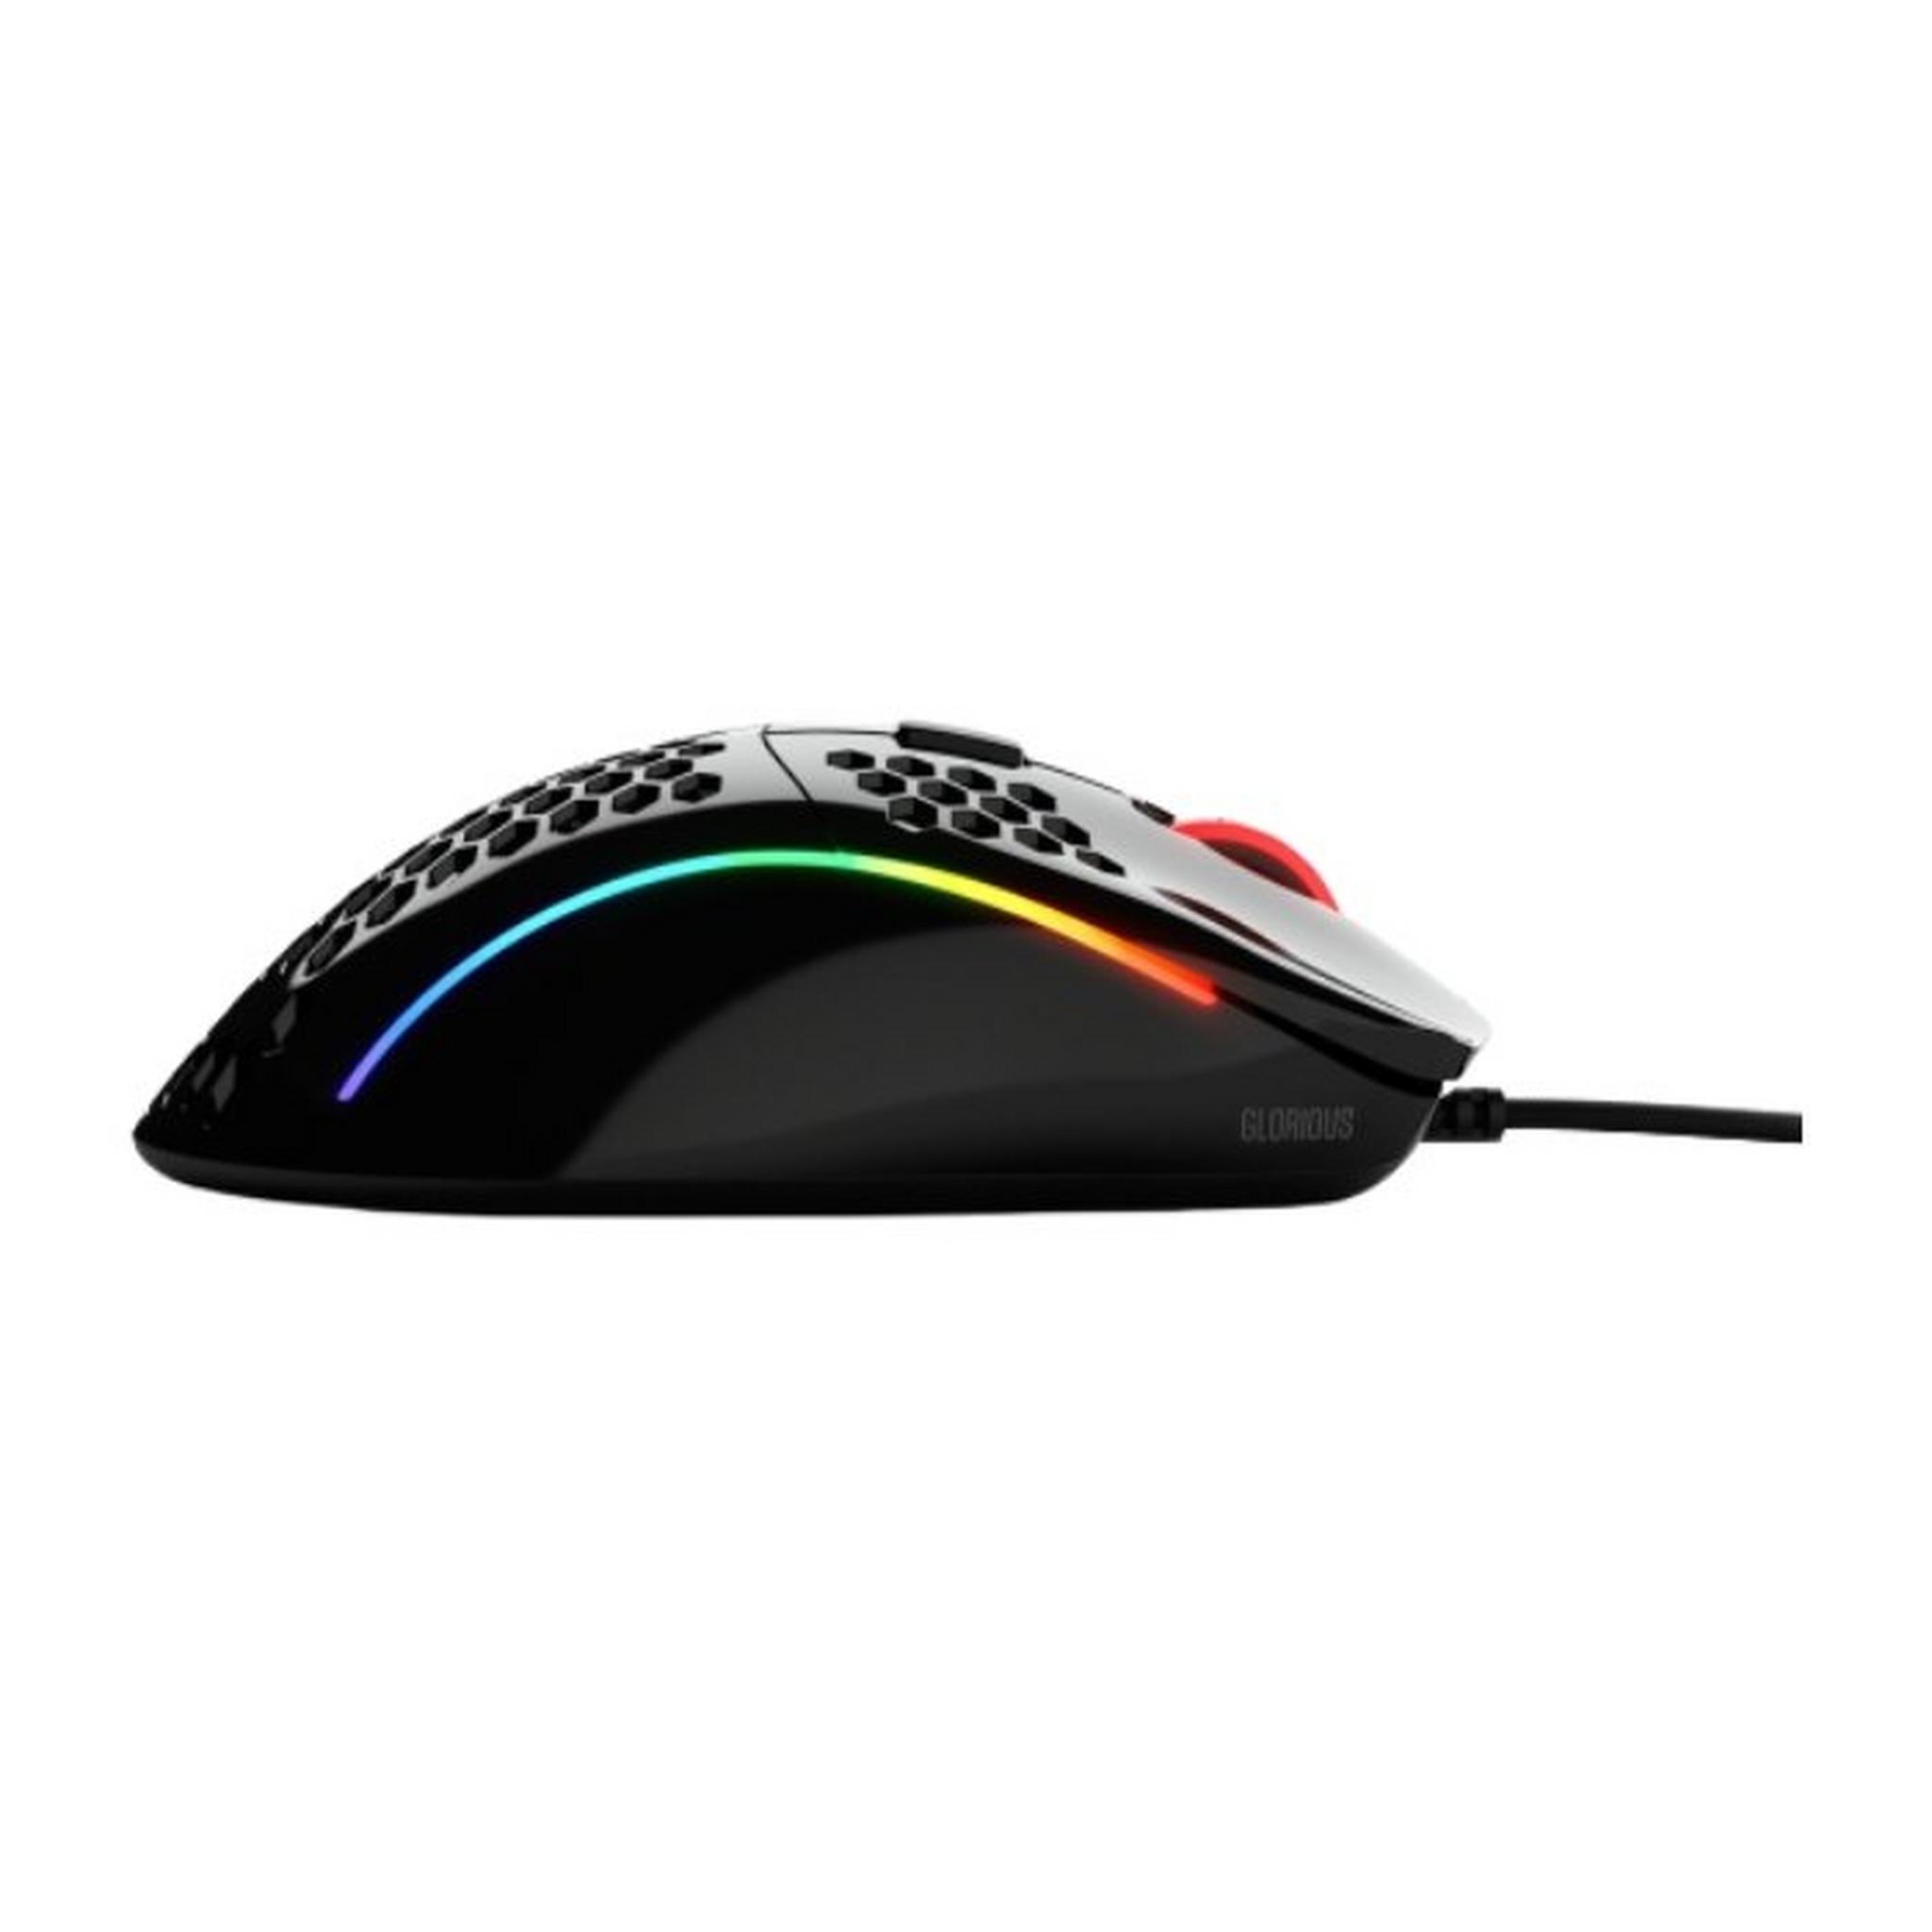 Glorious Model D Gaming Mouse - Glossy Black